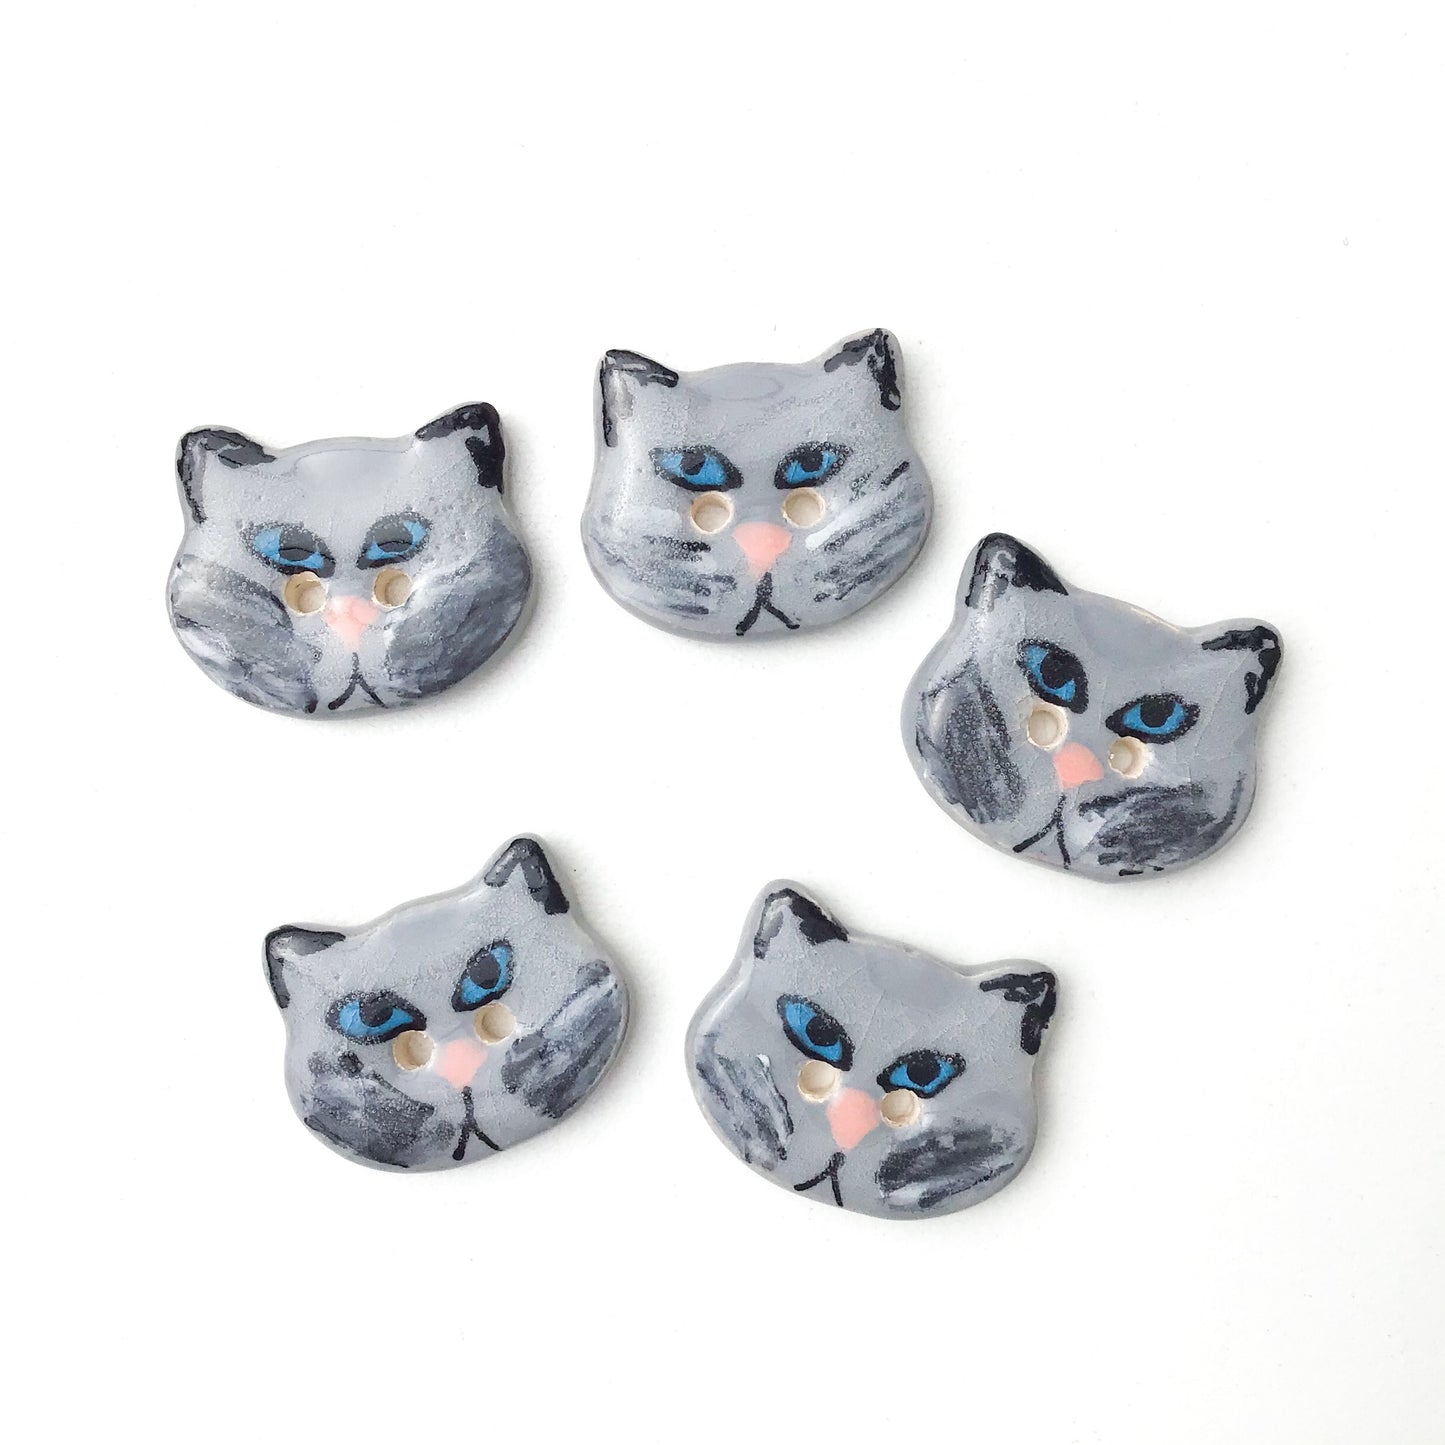 Cat Buttons - Ceramic Kitty Buttons - 3/4" x 7/8"